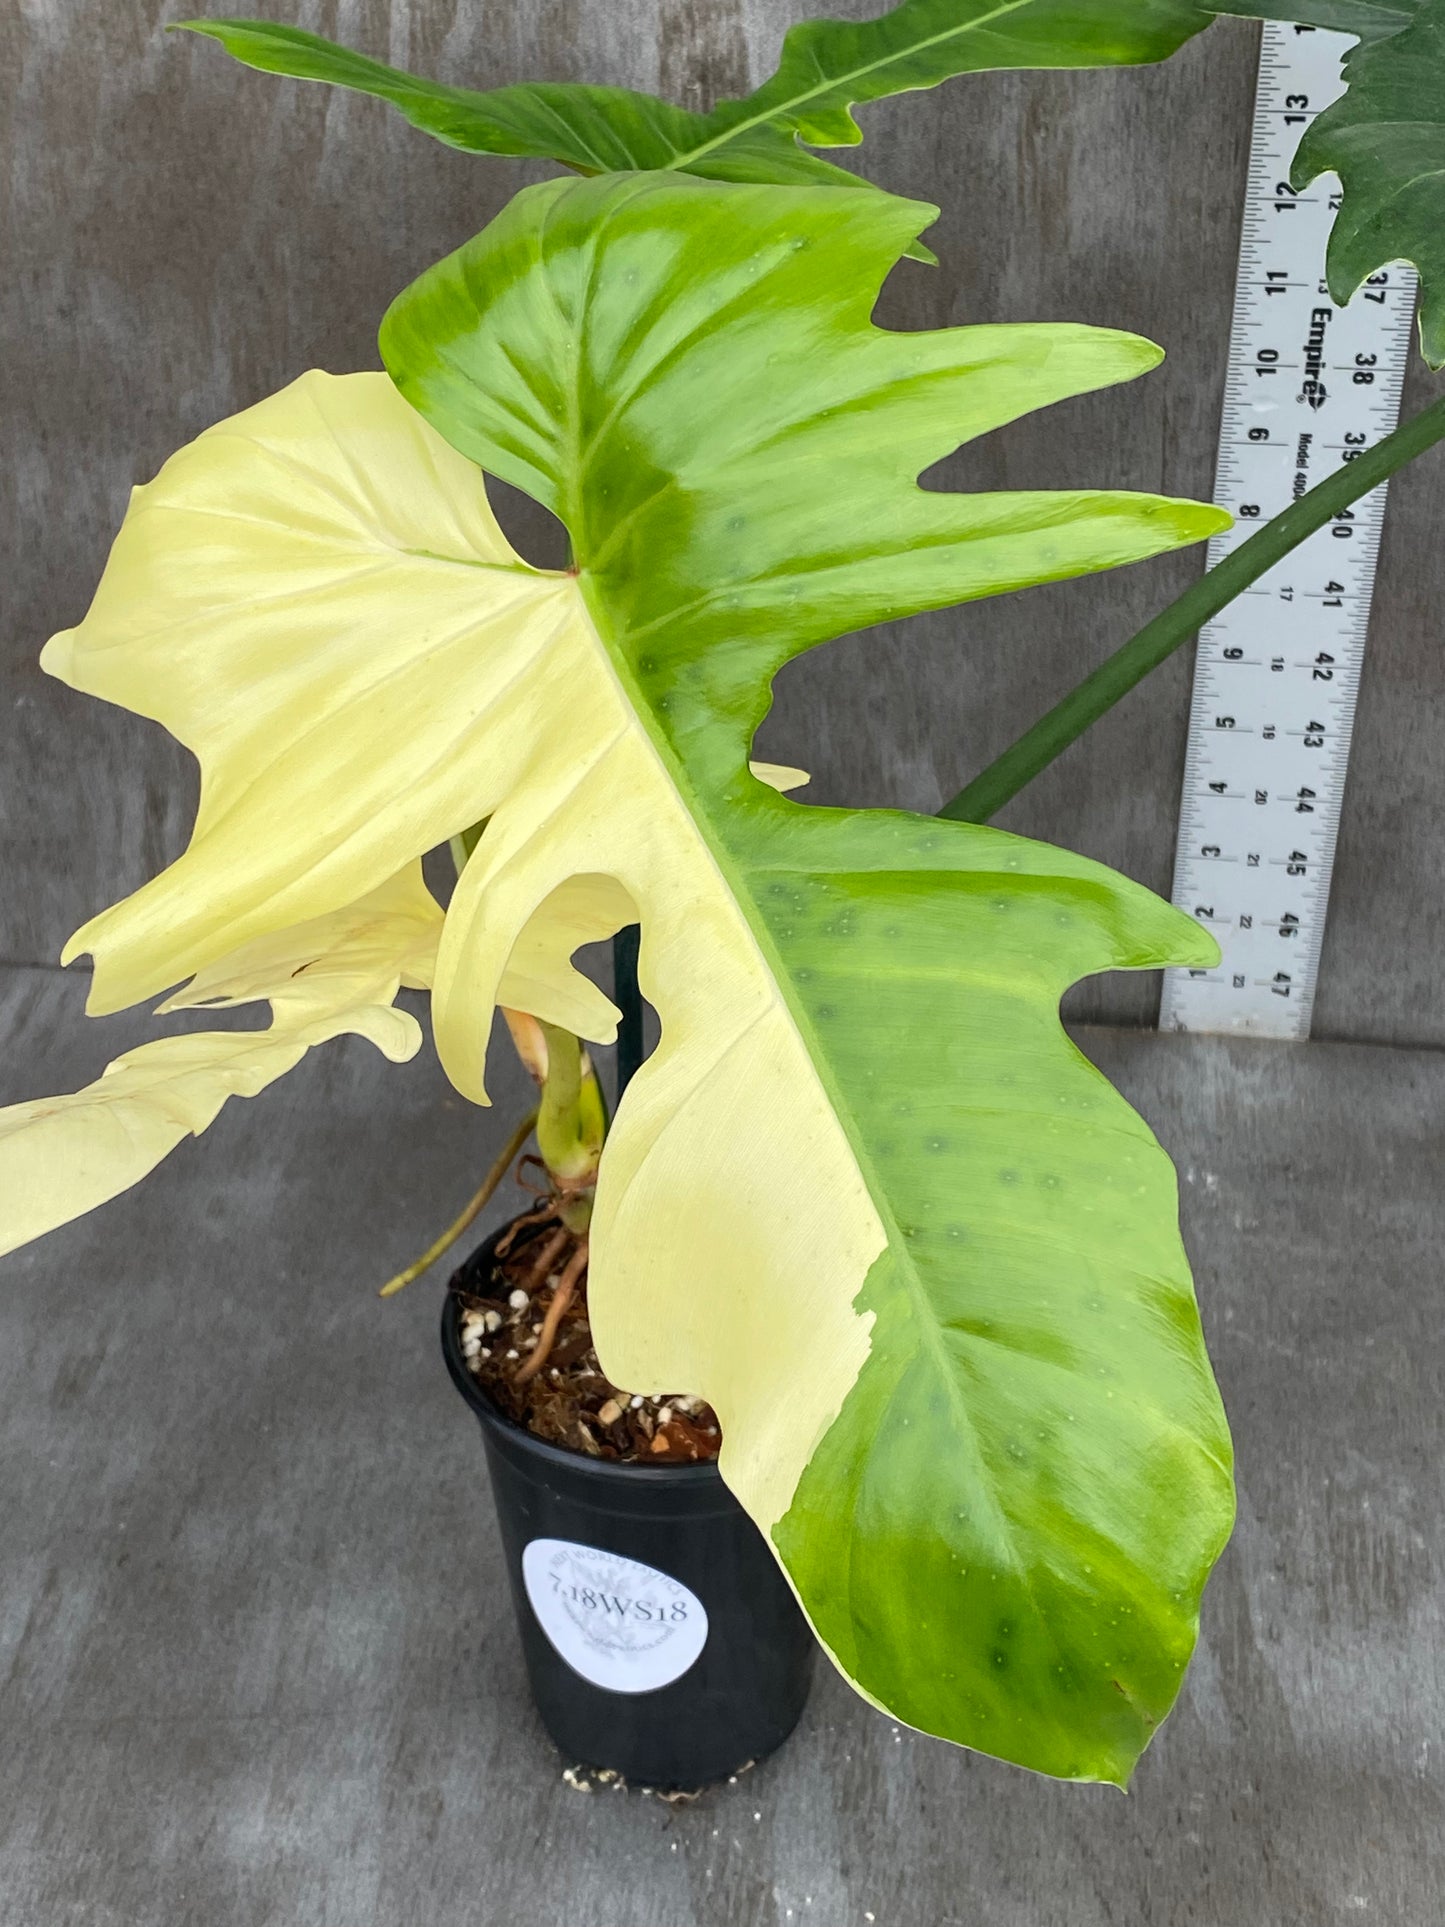 Philodendron Variegated Golden Dragon - Half Moon, perfect bars of color through stem!